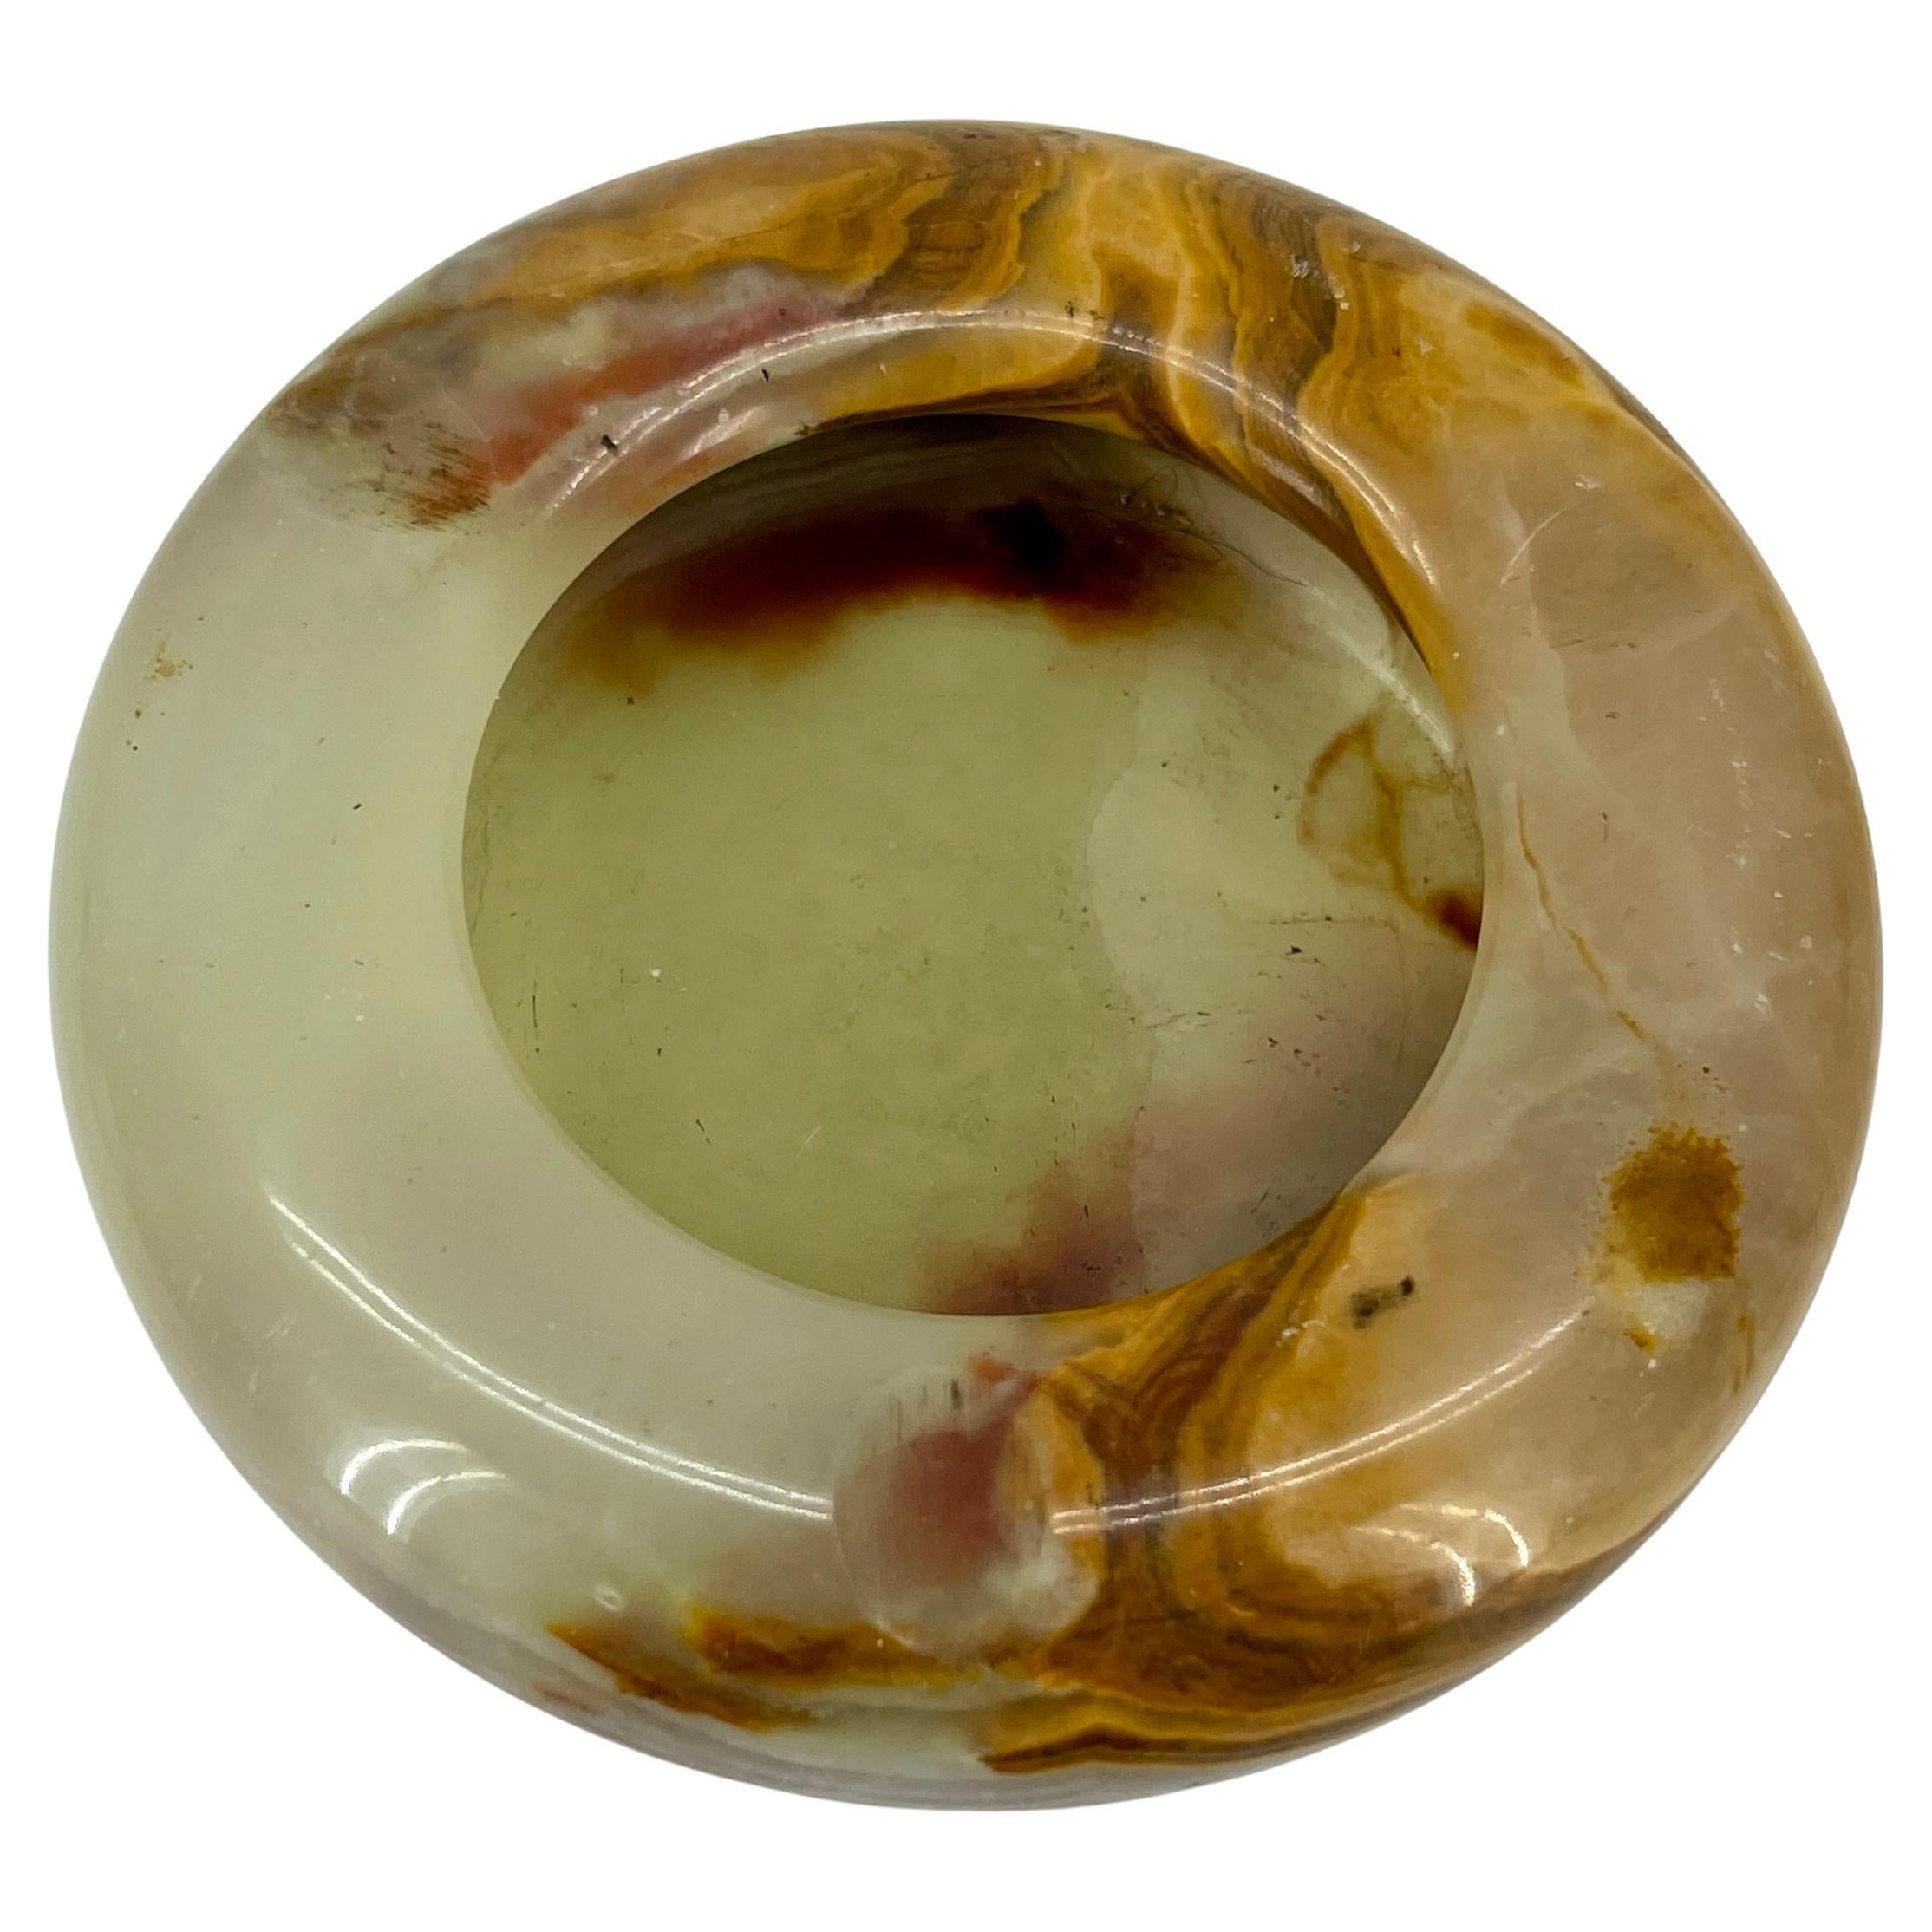 Mid-Century Modern round onyx bowl or ashtray. This outstanding onyx round bowl is made in Spain, 1950s. Carved and polished onyx stone, showing the mineral’s distinctive banding striations. Beautiful to be used as vide-poche, decorative bowl or